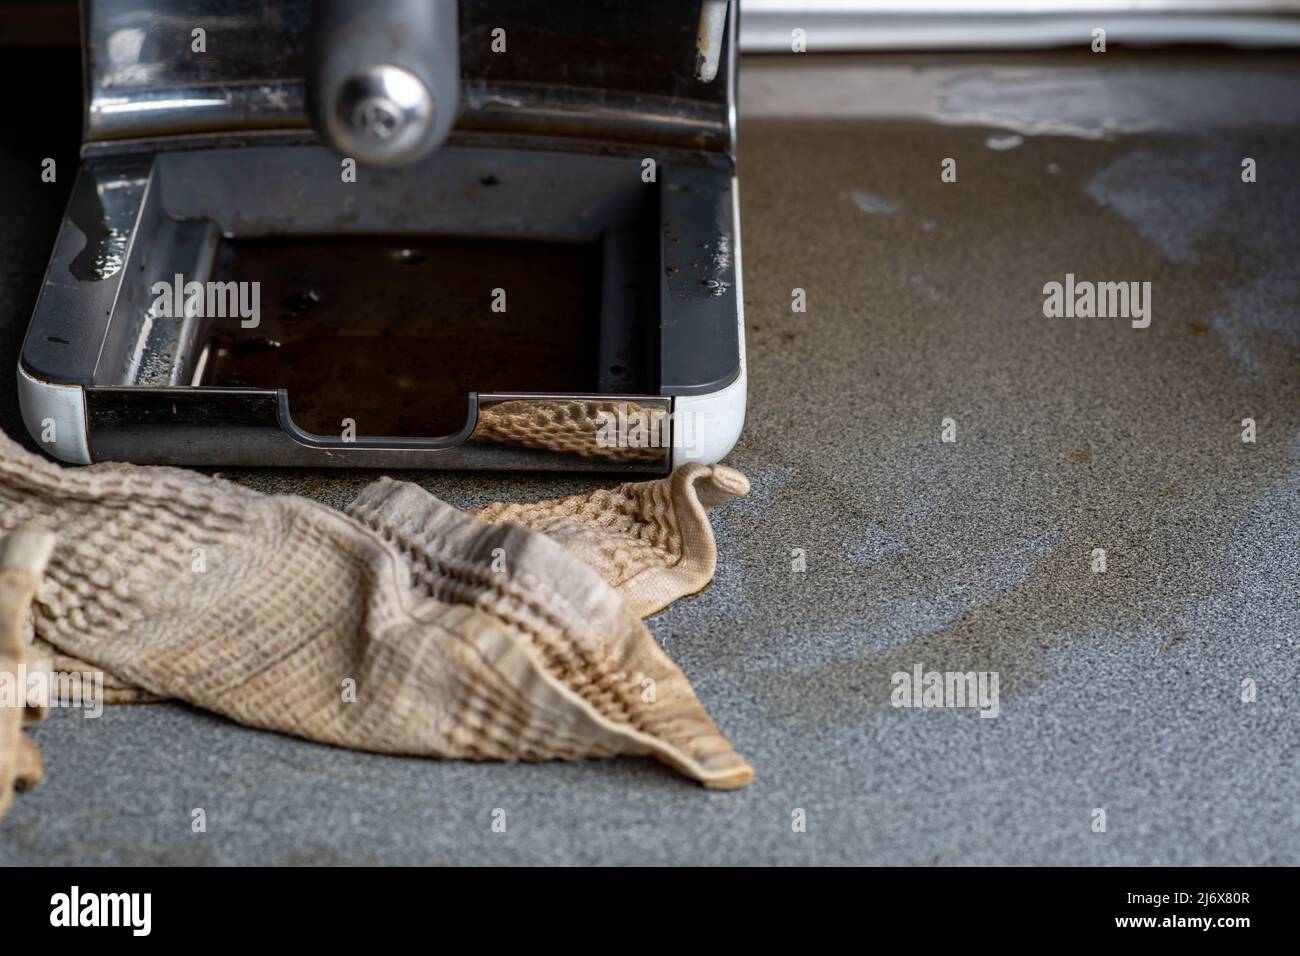 The coffee machine has broken down and needs to be repaired. Leaked,  spilling coffee on the kitchen table Stock Photo - Alamy